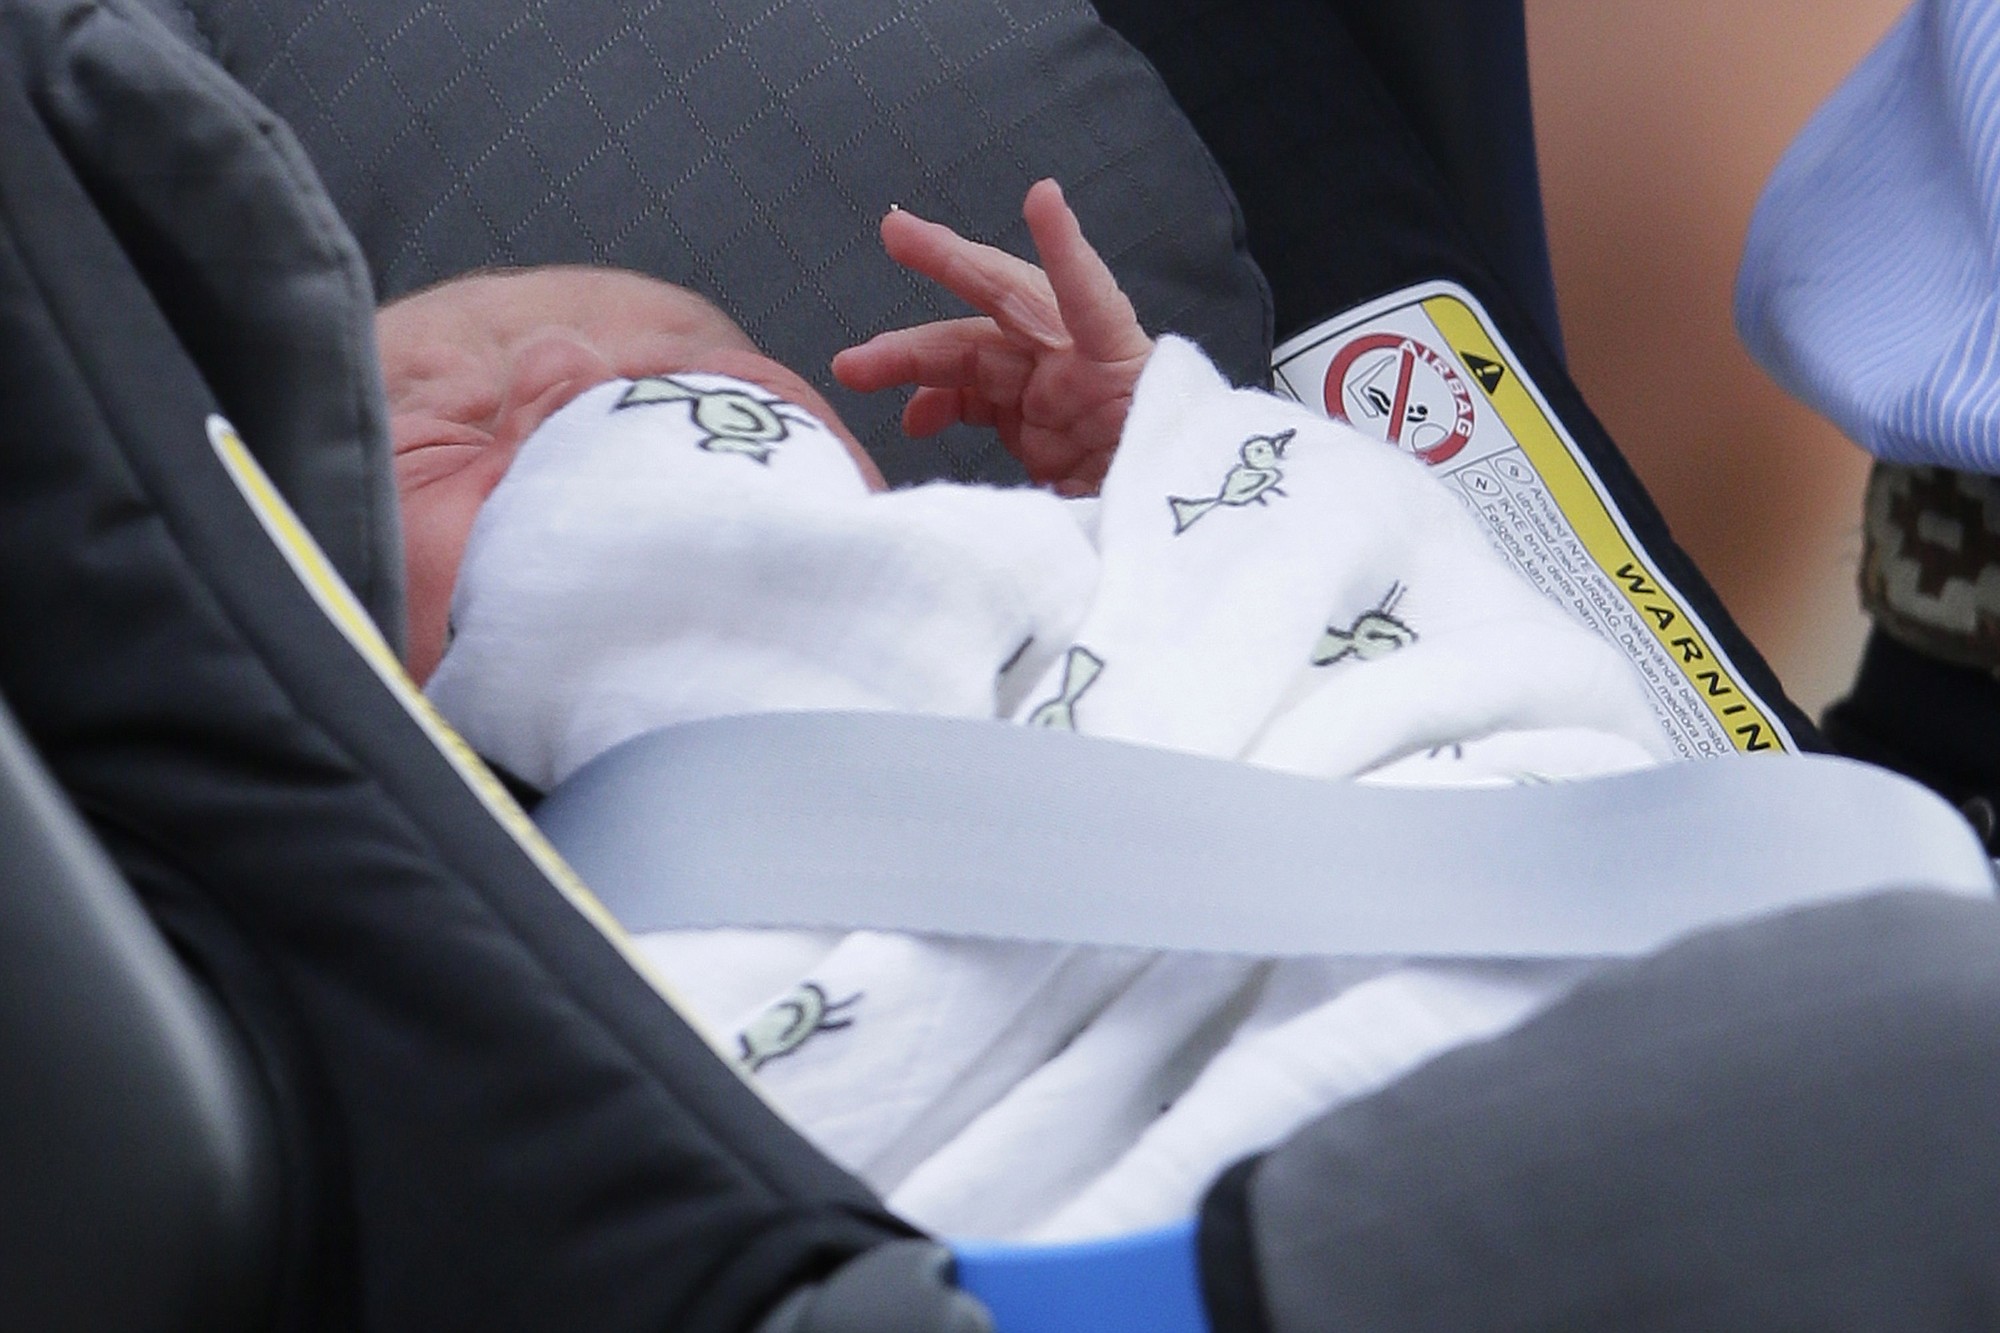 The Prince of Cambridge lays in a carseat as his parents, Britain's Prince William and Kate, Duchess of Cambridge, leave St.